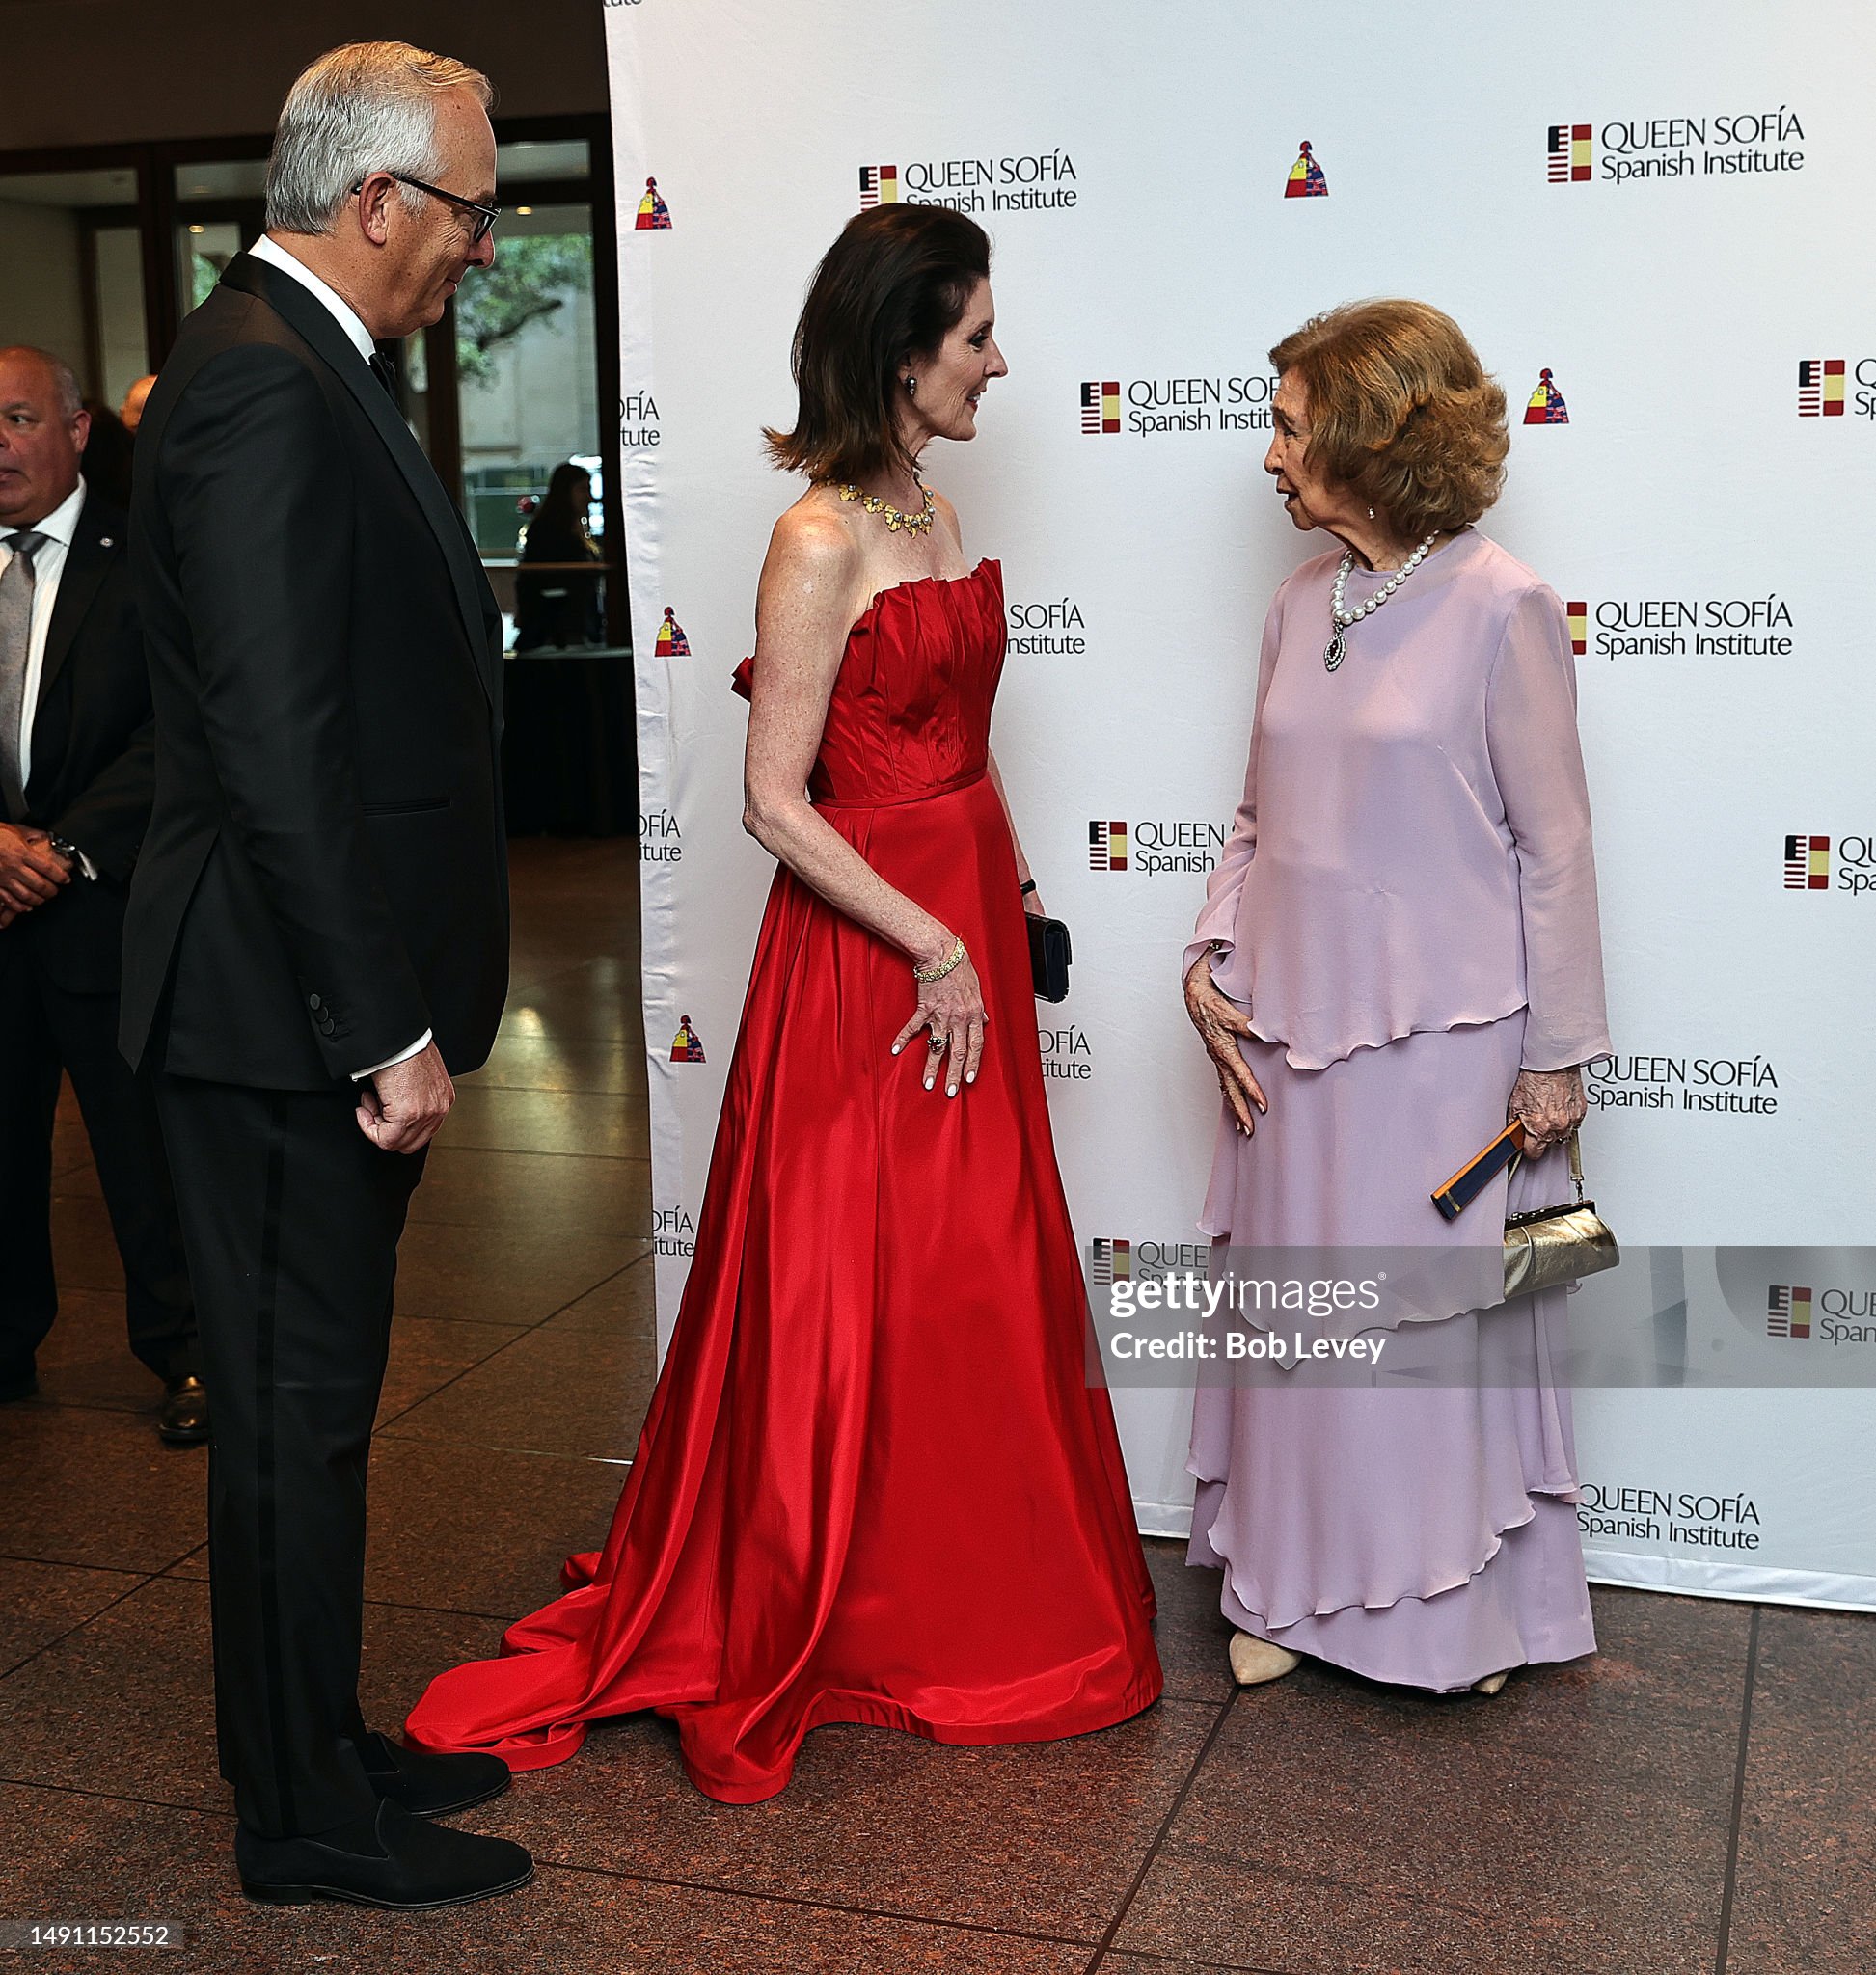 bobby-tudor-phoebe-tudor-and-queen-sofia-of-spain-attend-the-sophia-awards-for-excellence.jpg